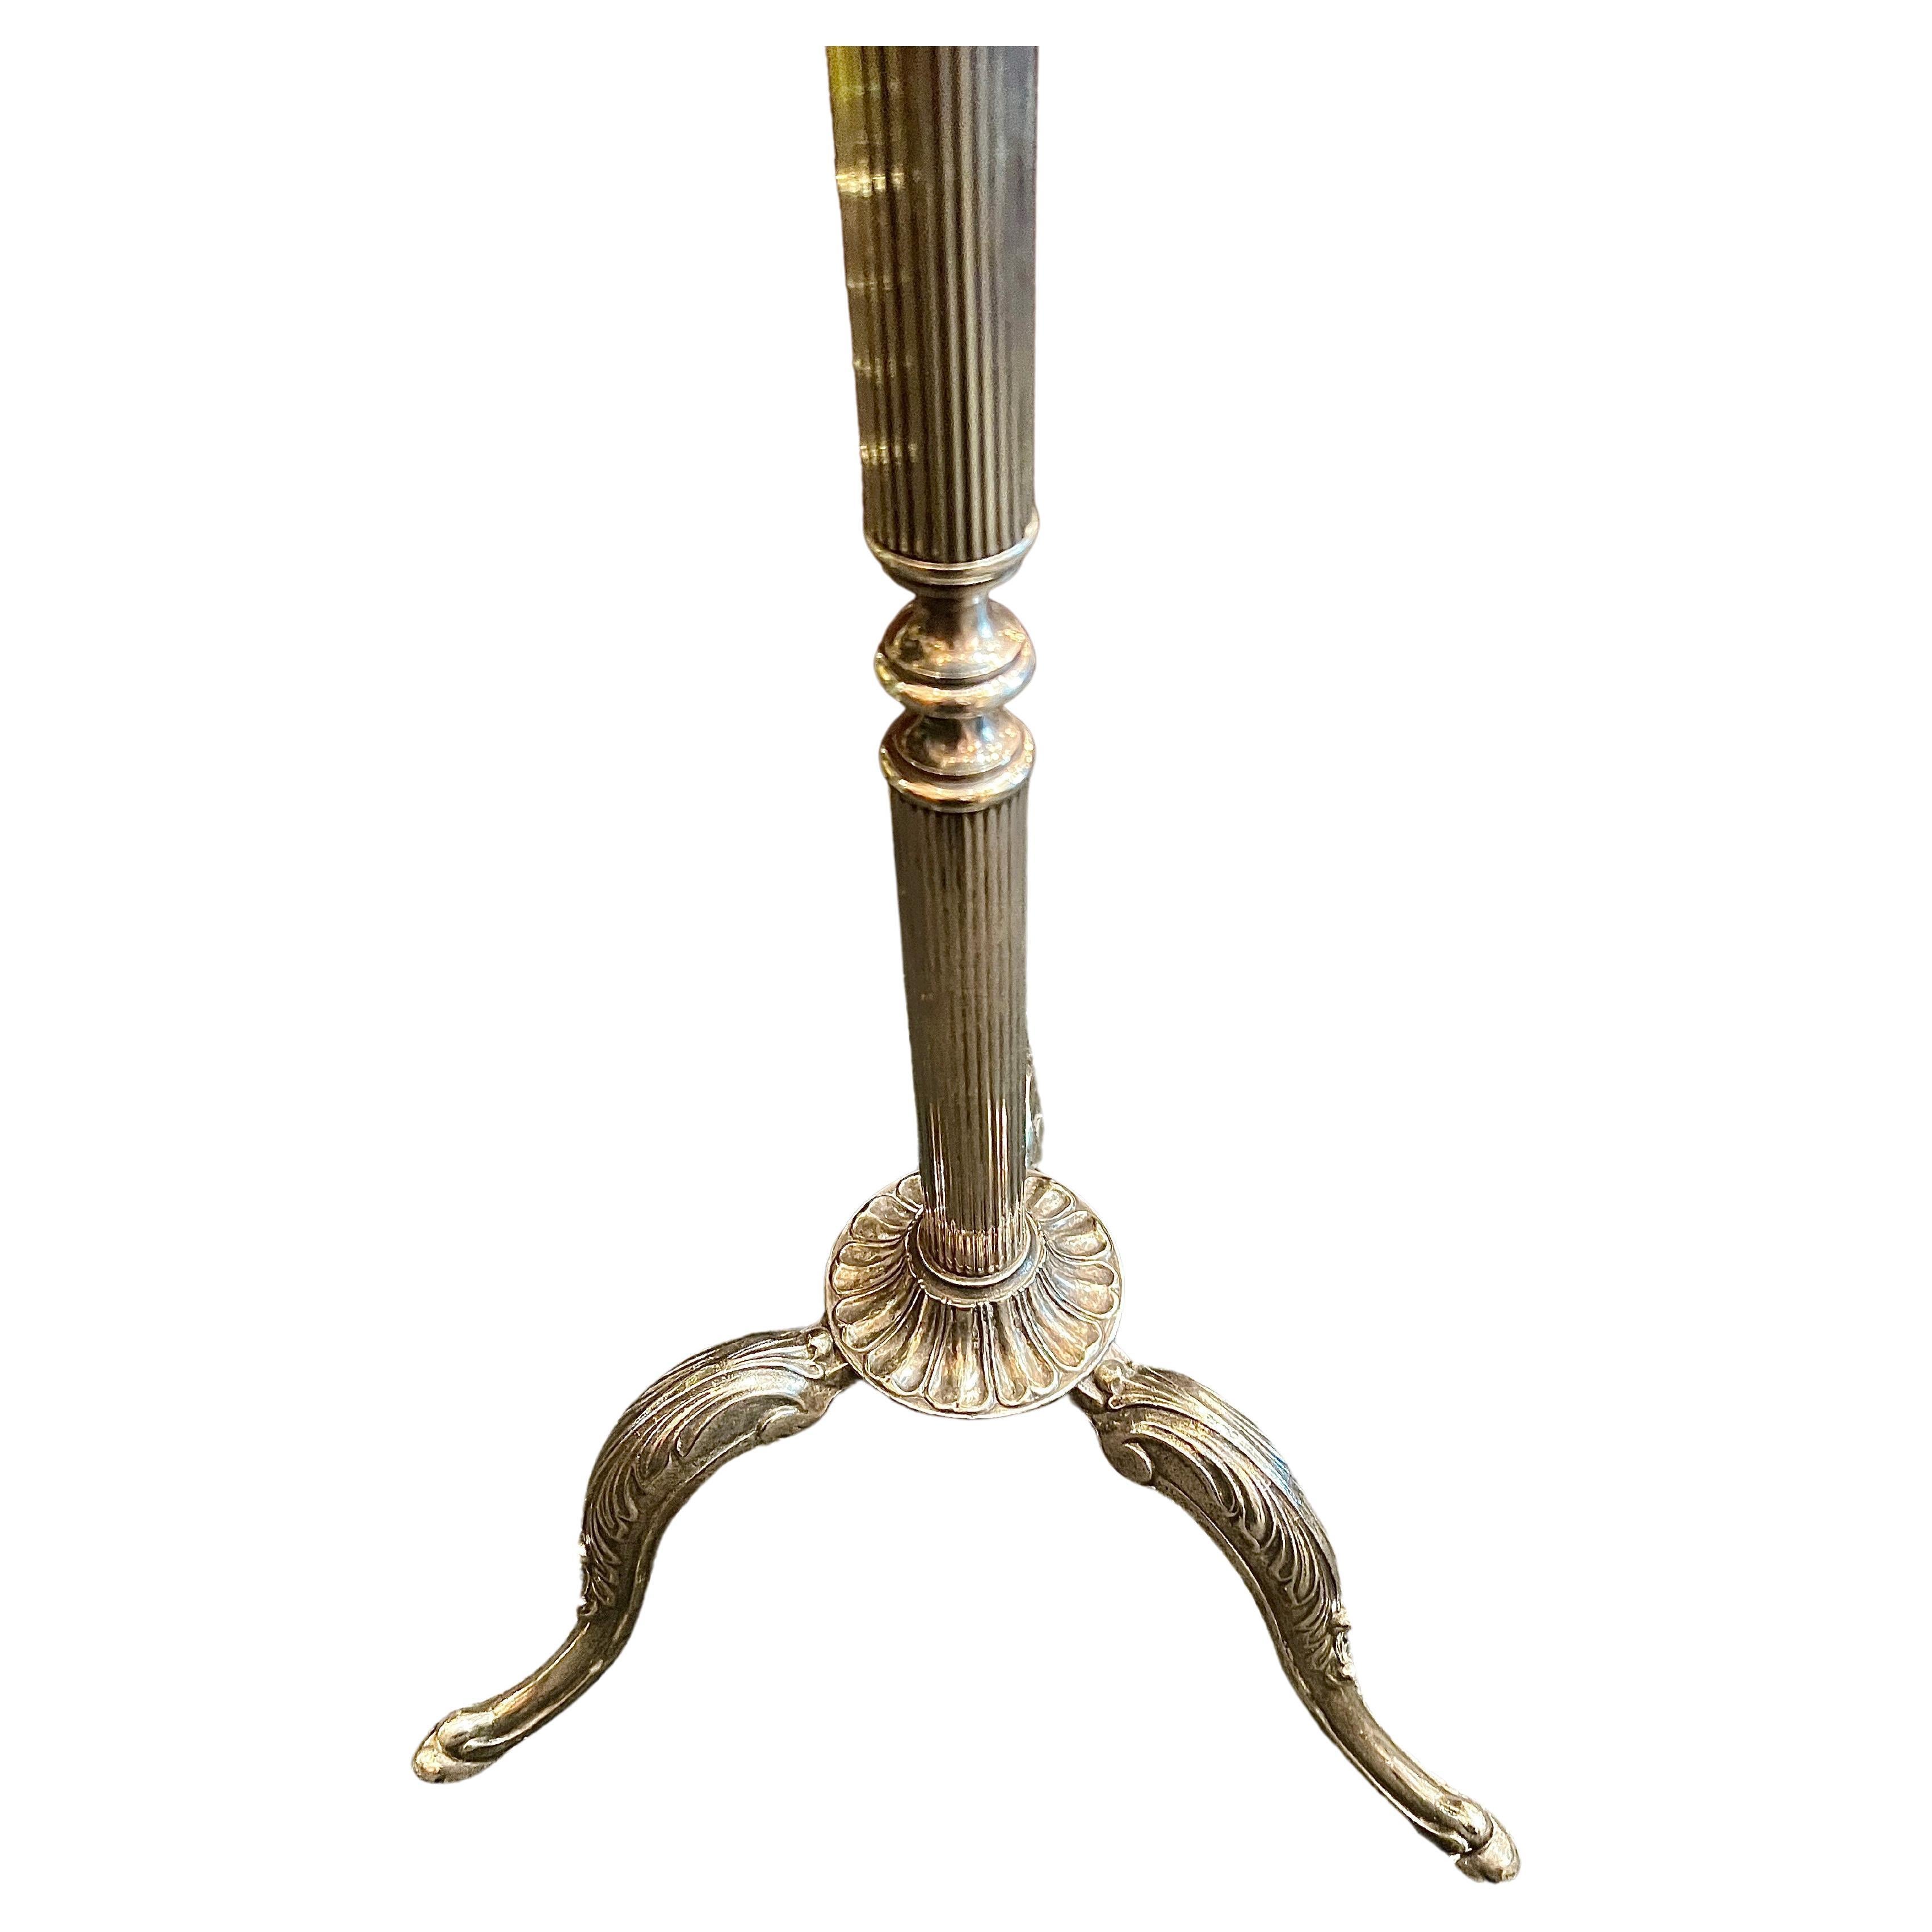 Estate Silver Plated Champagne Bucket on Stand, Circa 1930-1940. 2